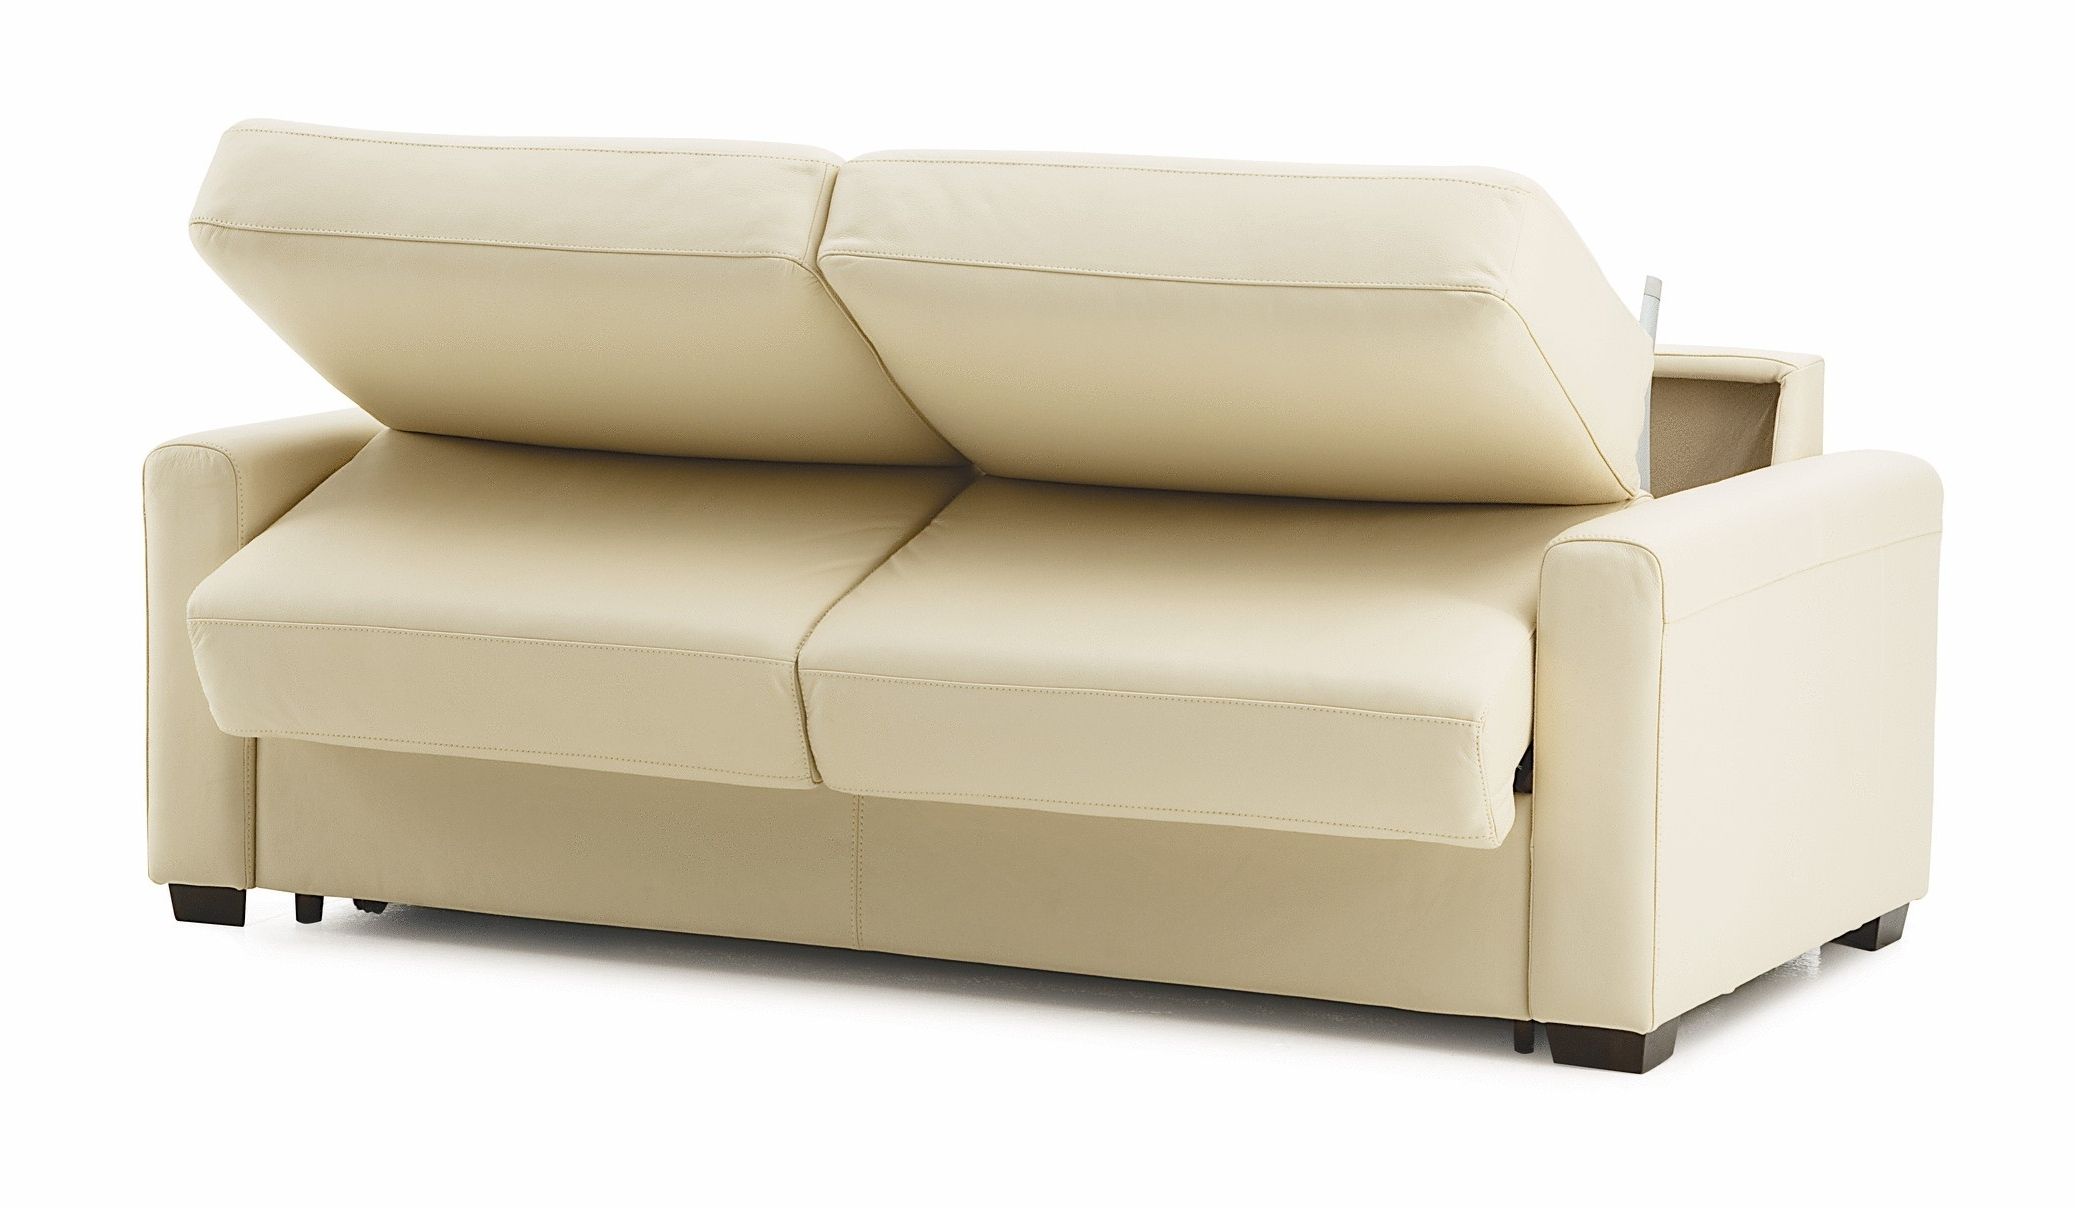 King Size Sleeper Sofas – Ansugallery In Most Recent King Size Sleeper Sofas (View 8 of 20)